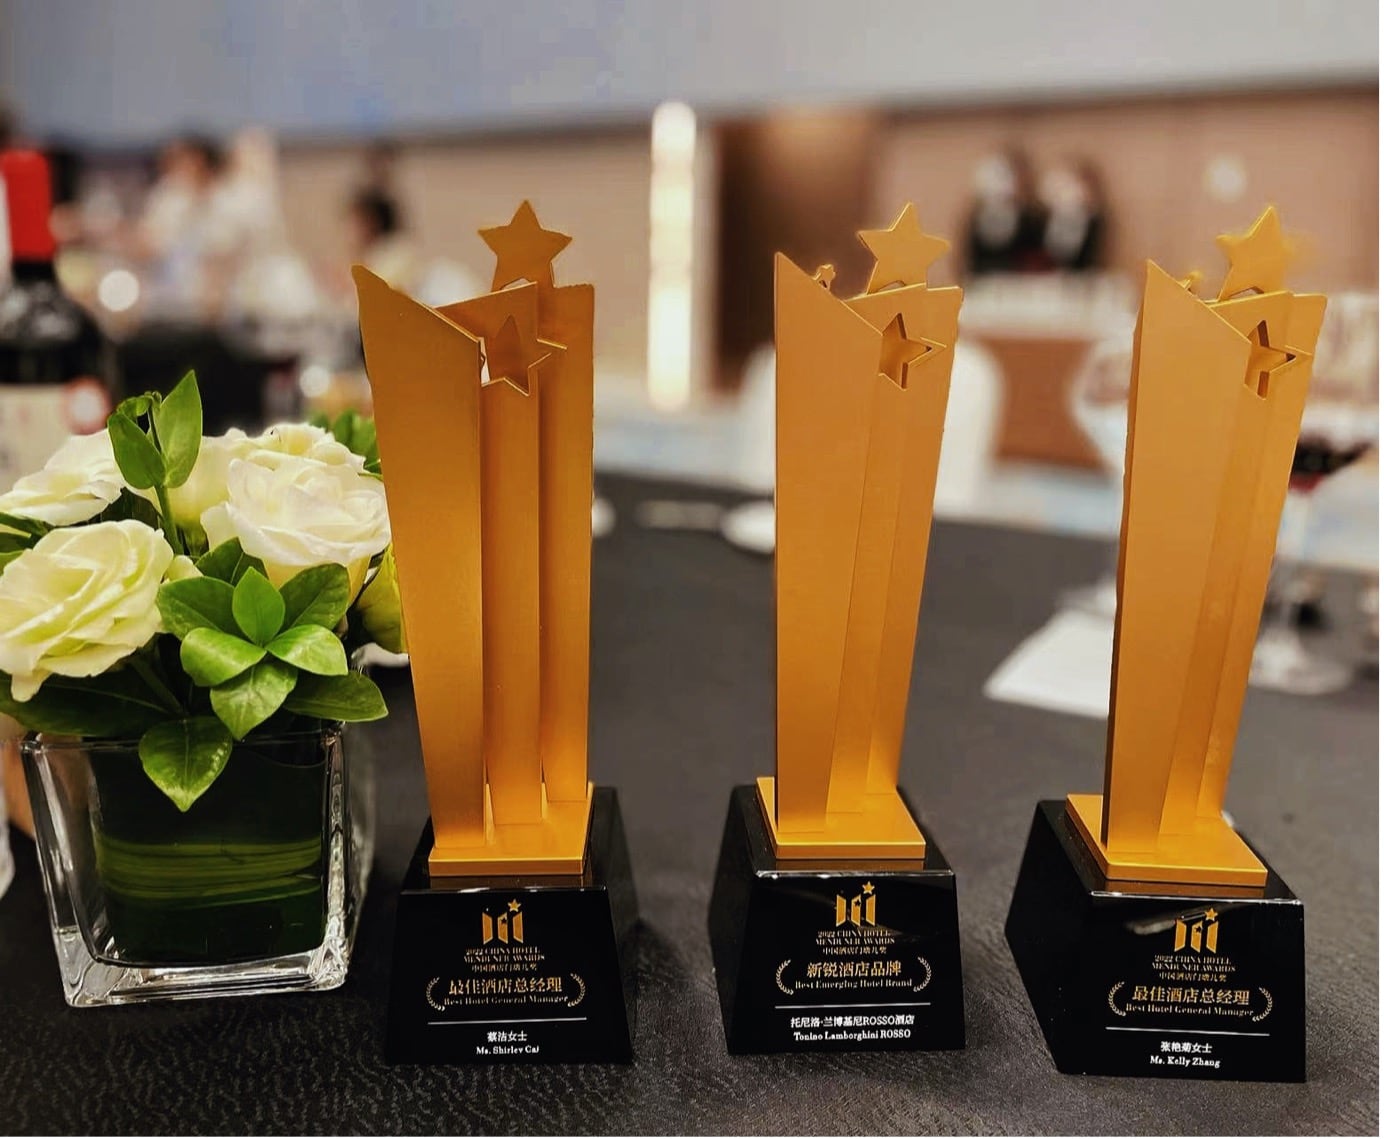 Join·In Holdings Group’s two core hotel brands won multiple awards from Menduner